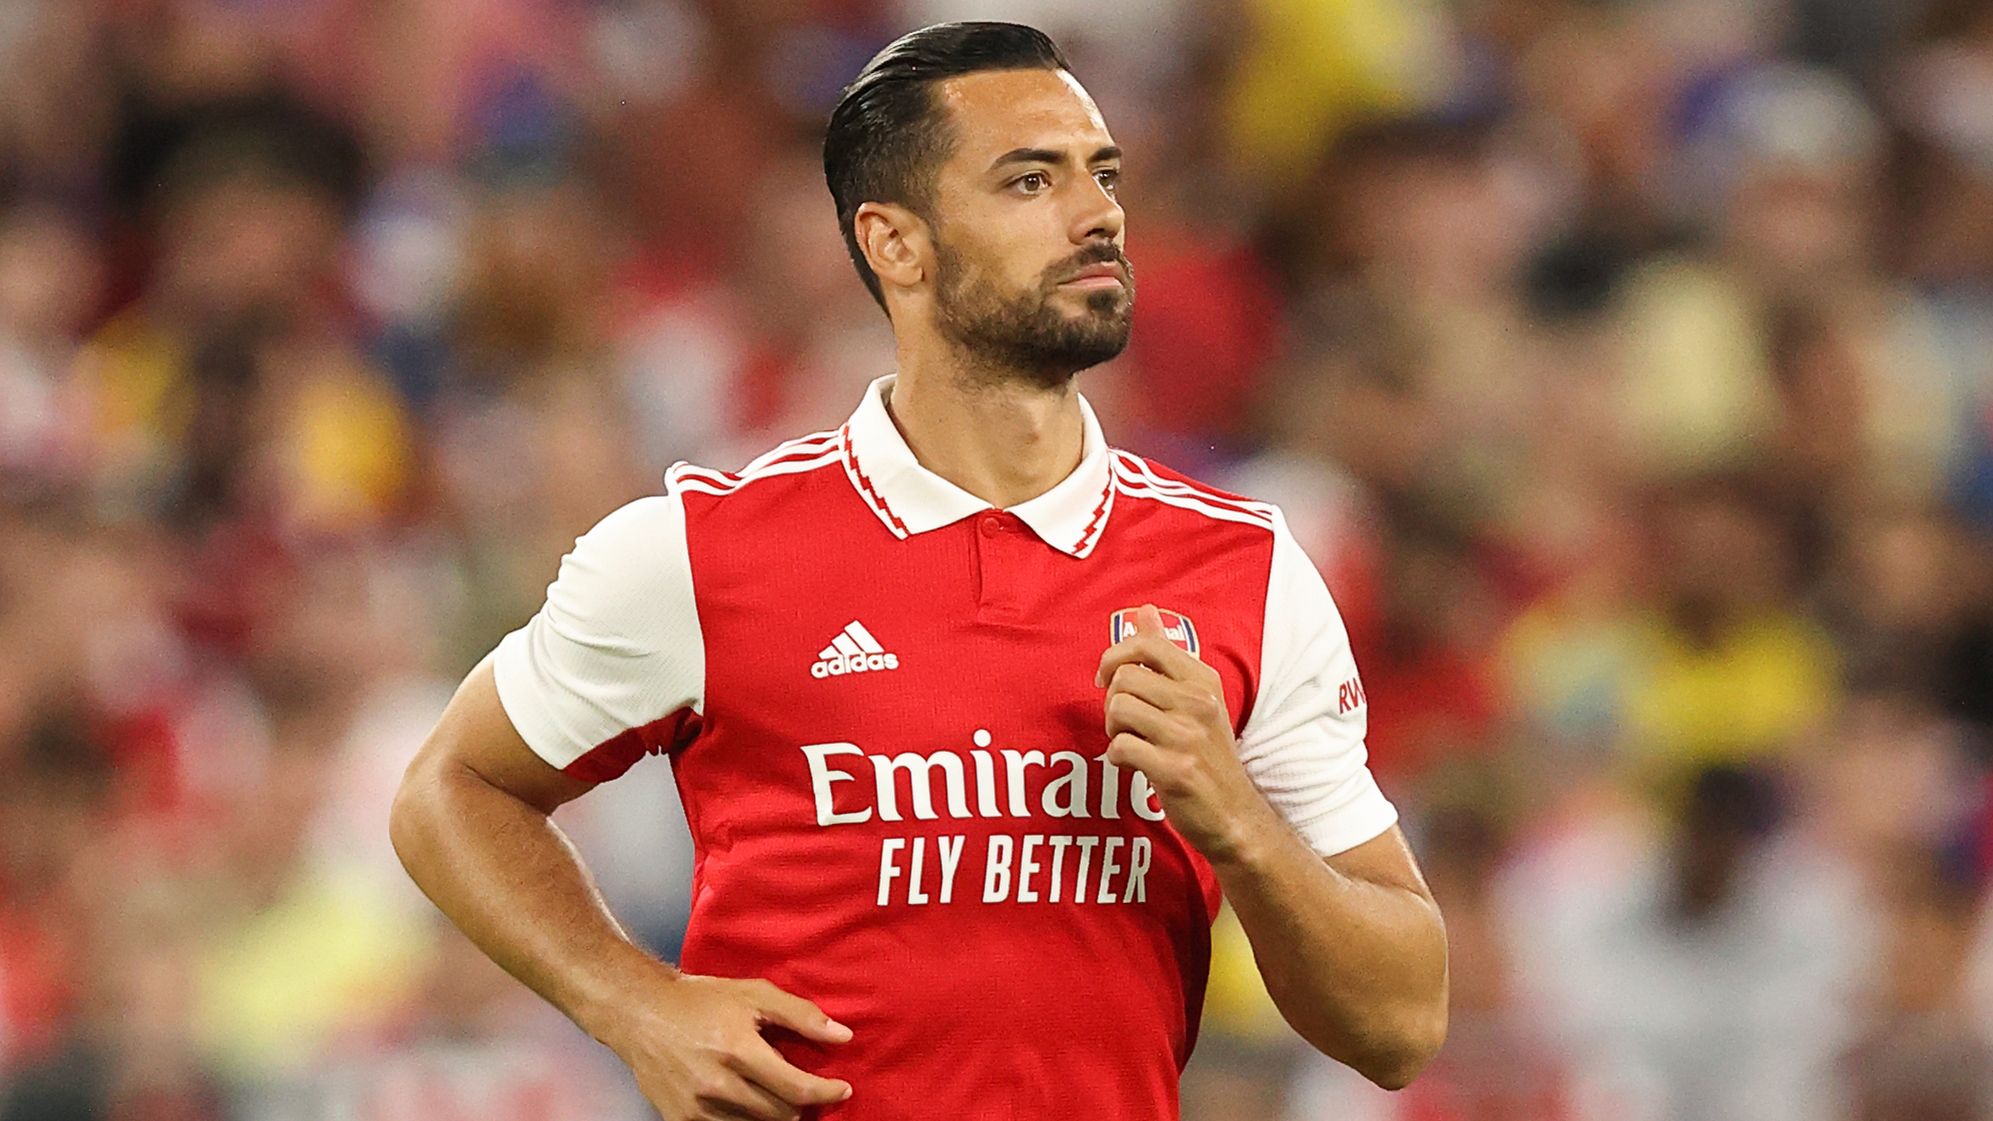 Arsenal player Pablo Mari wounded in mass stabbing in Italy